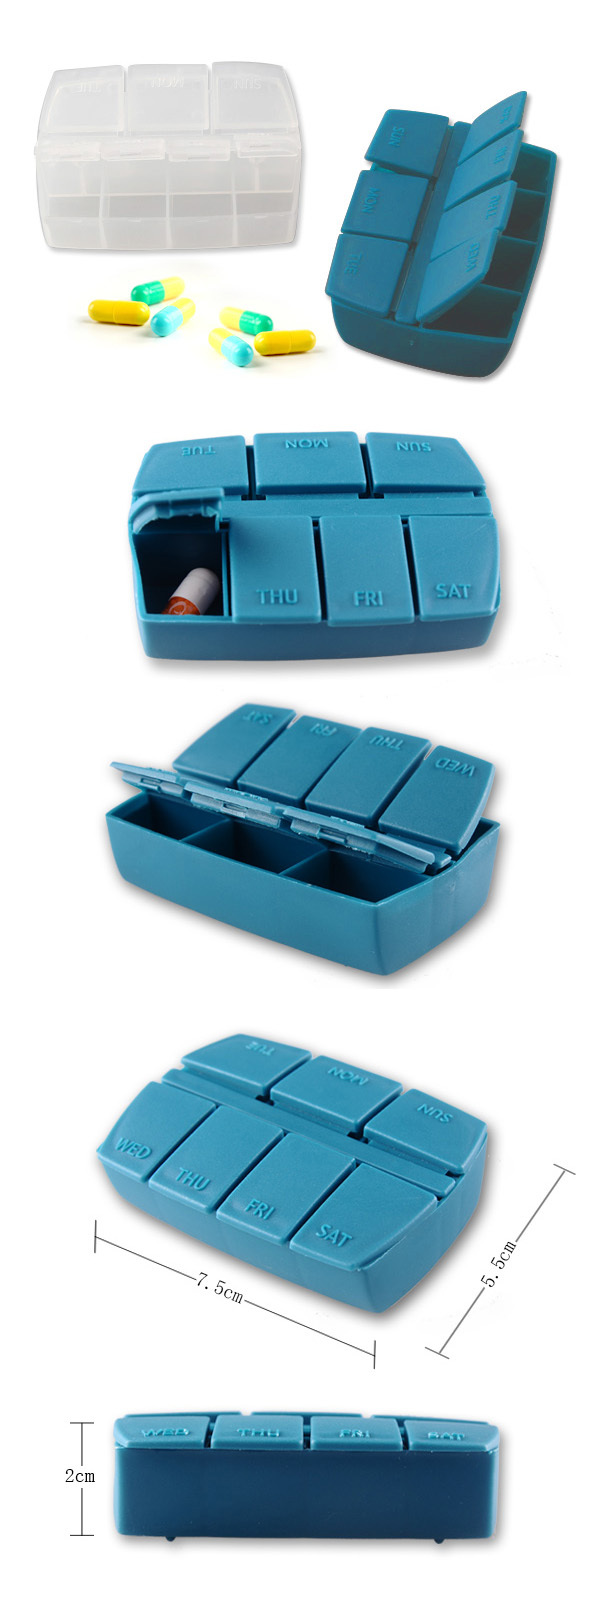 OEM for weekly pill box